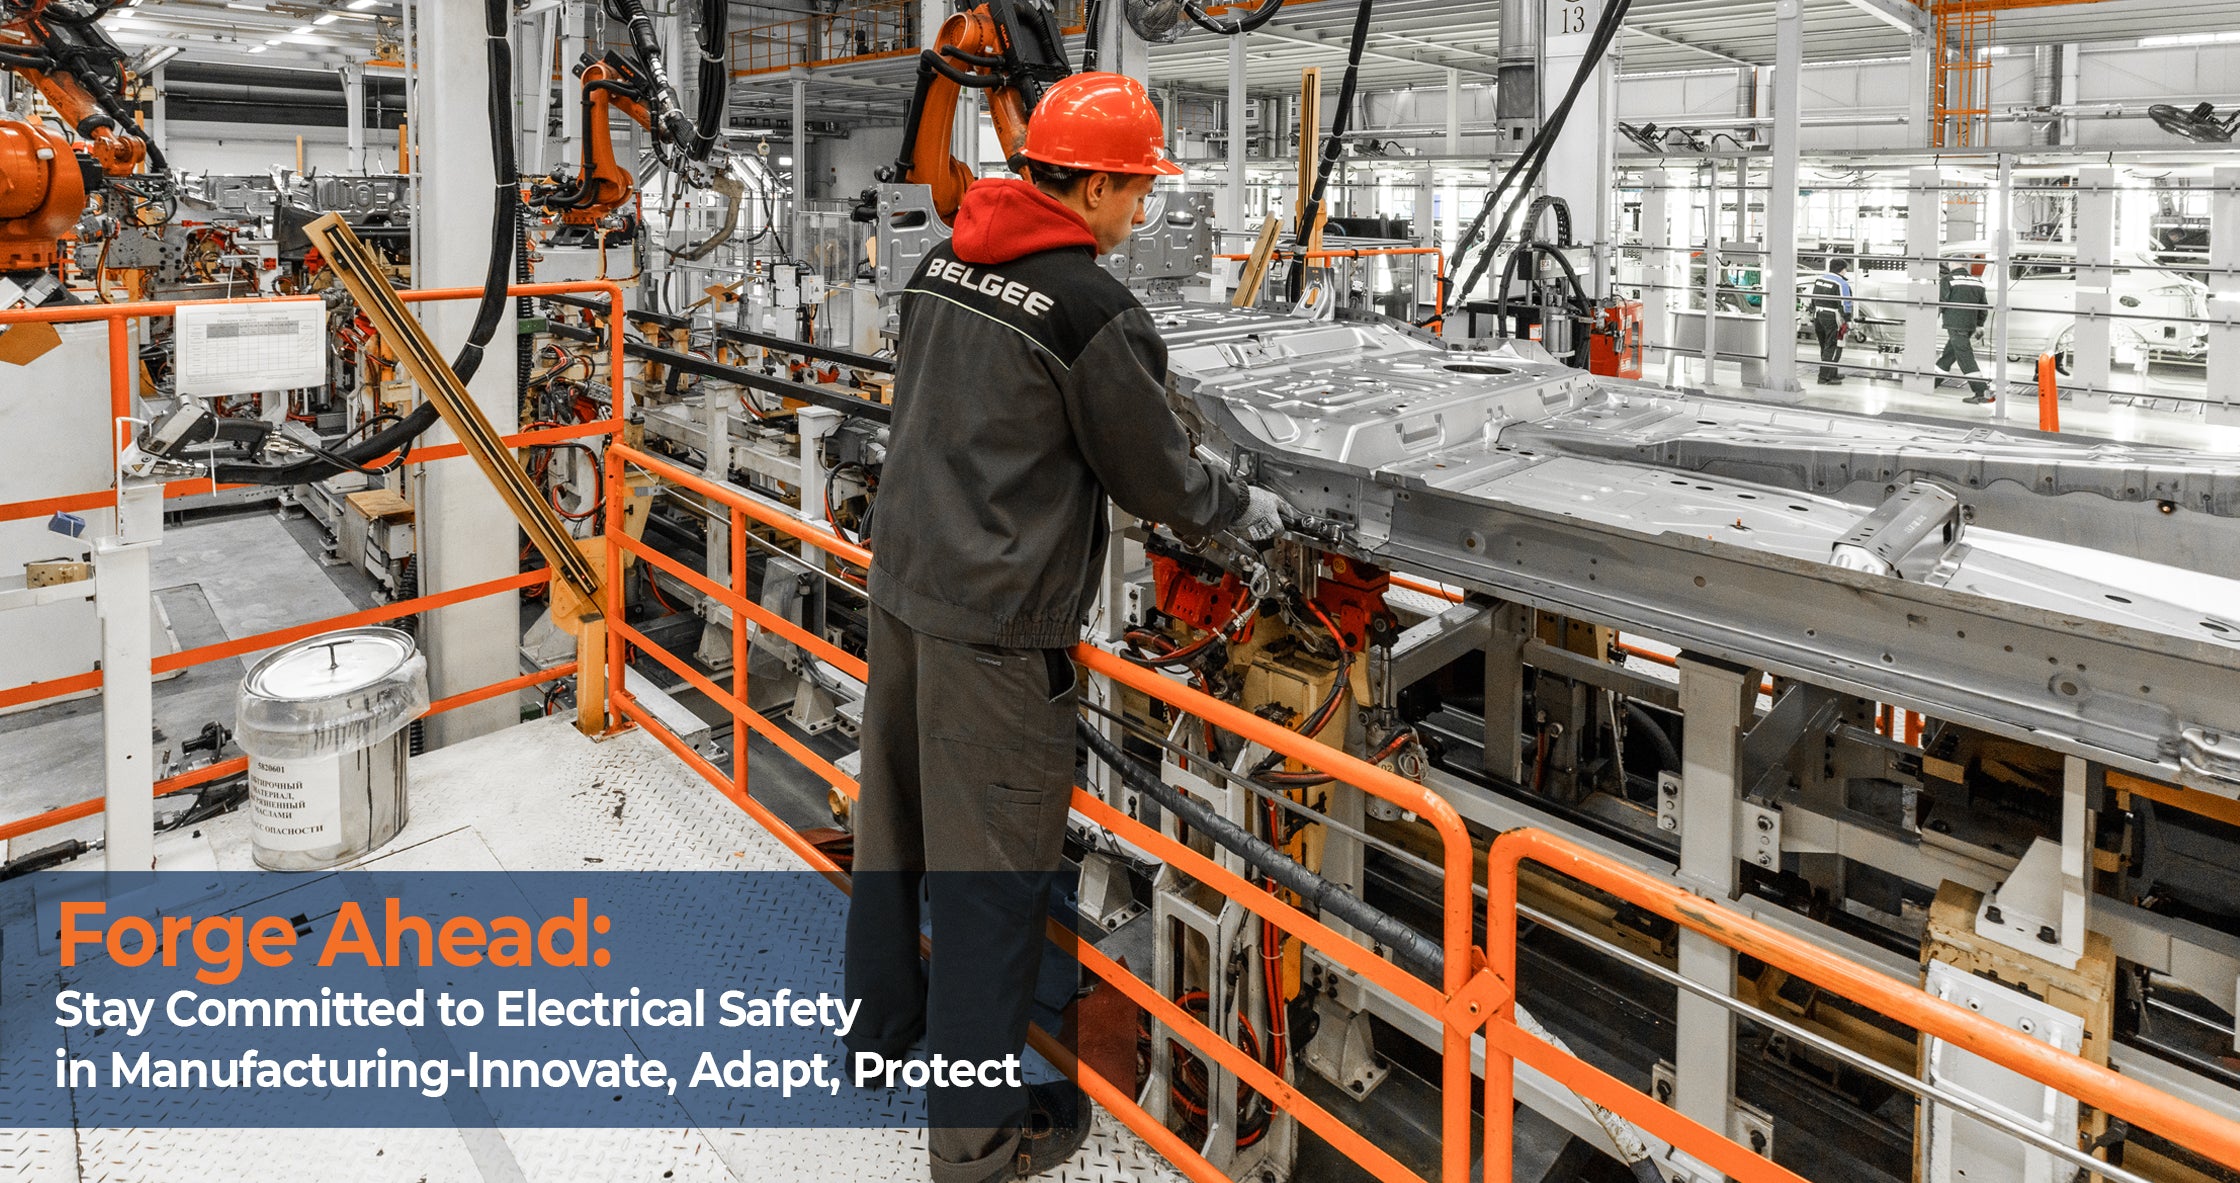 Worker at an automotive manufacturing plant focusing on assembly with emphasis on electrical safety and risk management in an industrial setting.